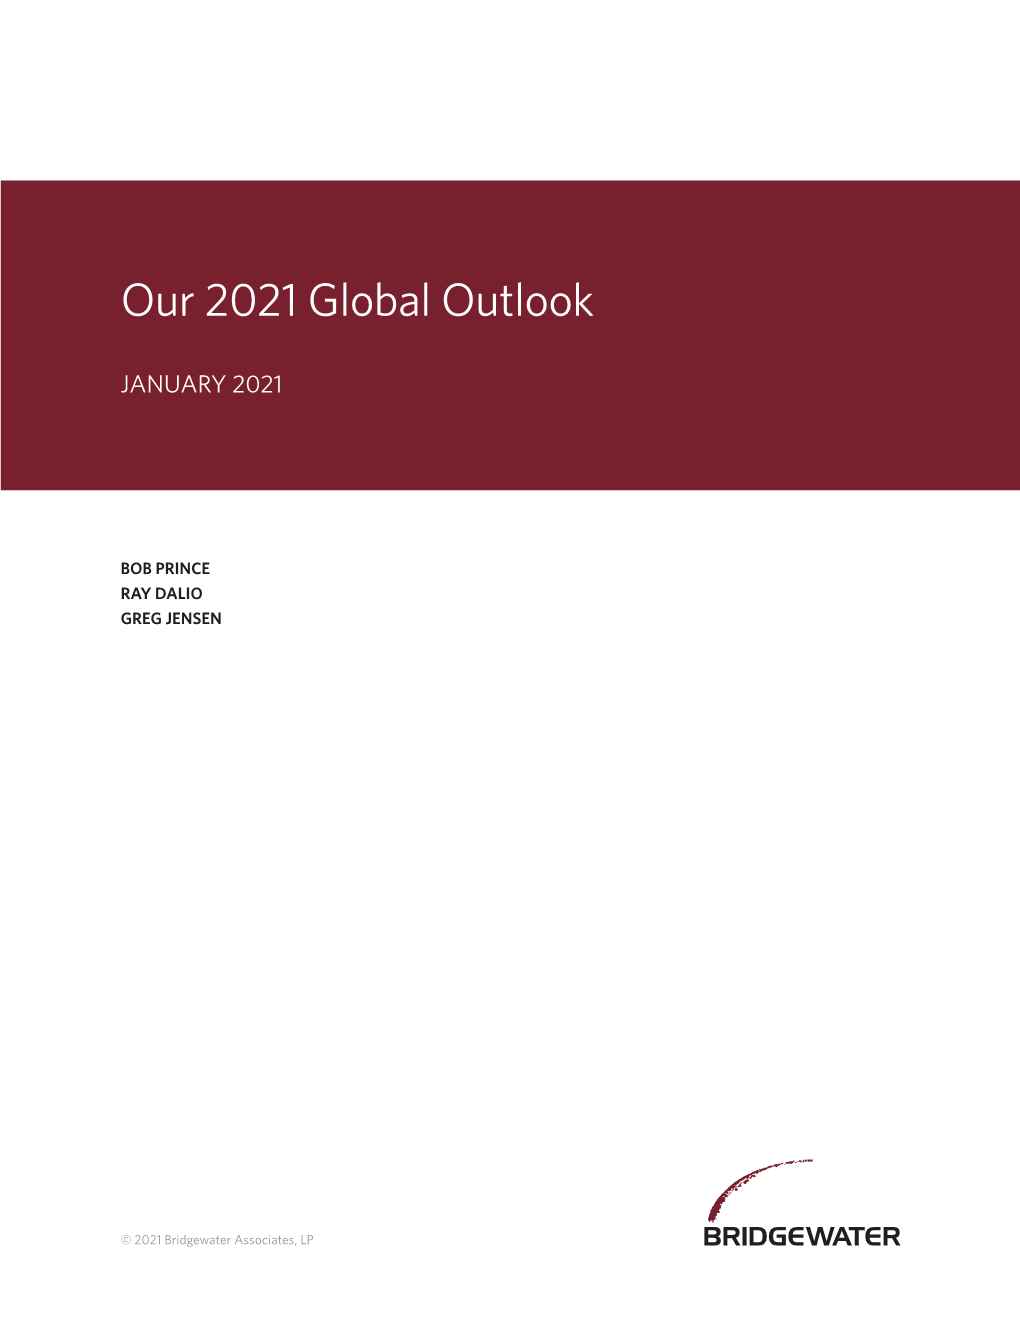 Our 2021 Global Outlook